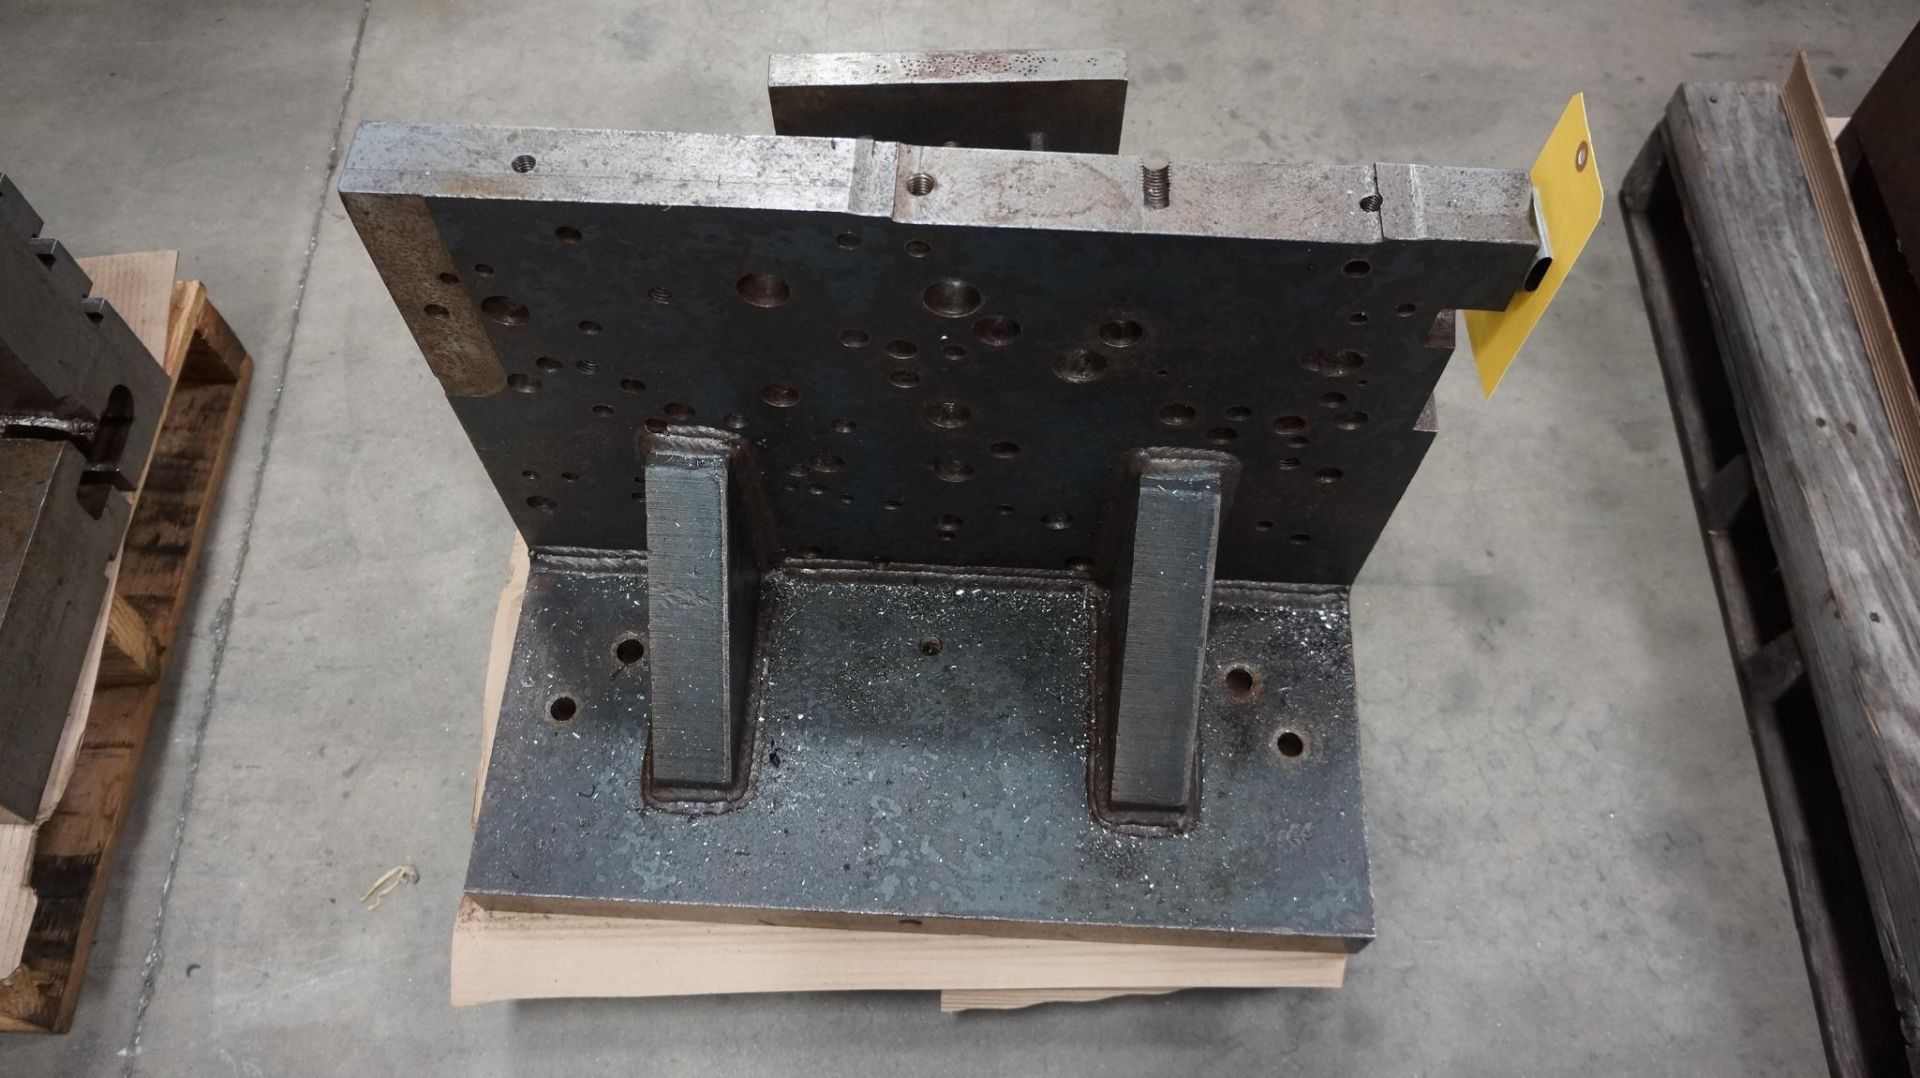 LOT OF ANGLE PLATES (THREE PALLETS) approx. (15) ranging in size from 12" x 24"W. x 17" tall to 5" x - Image 7 of 8